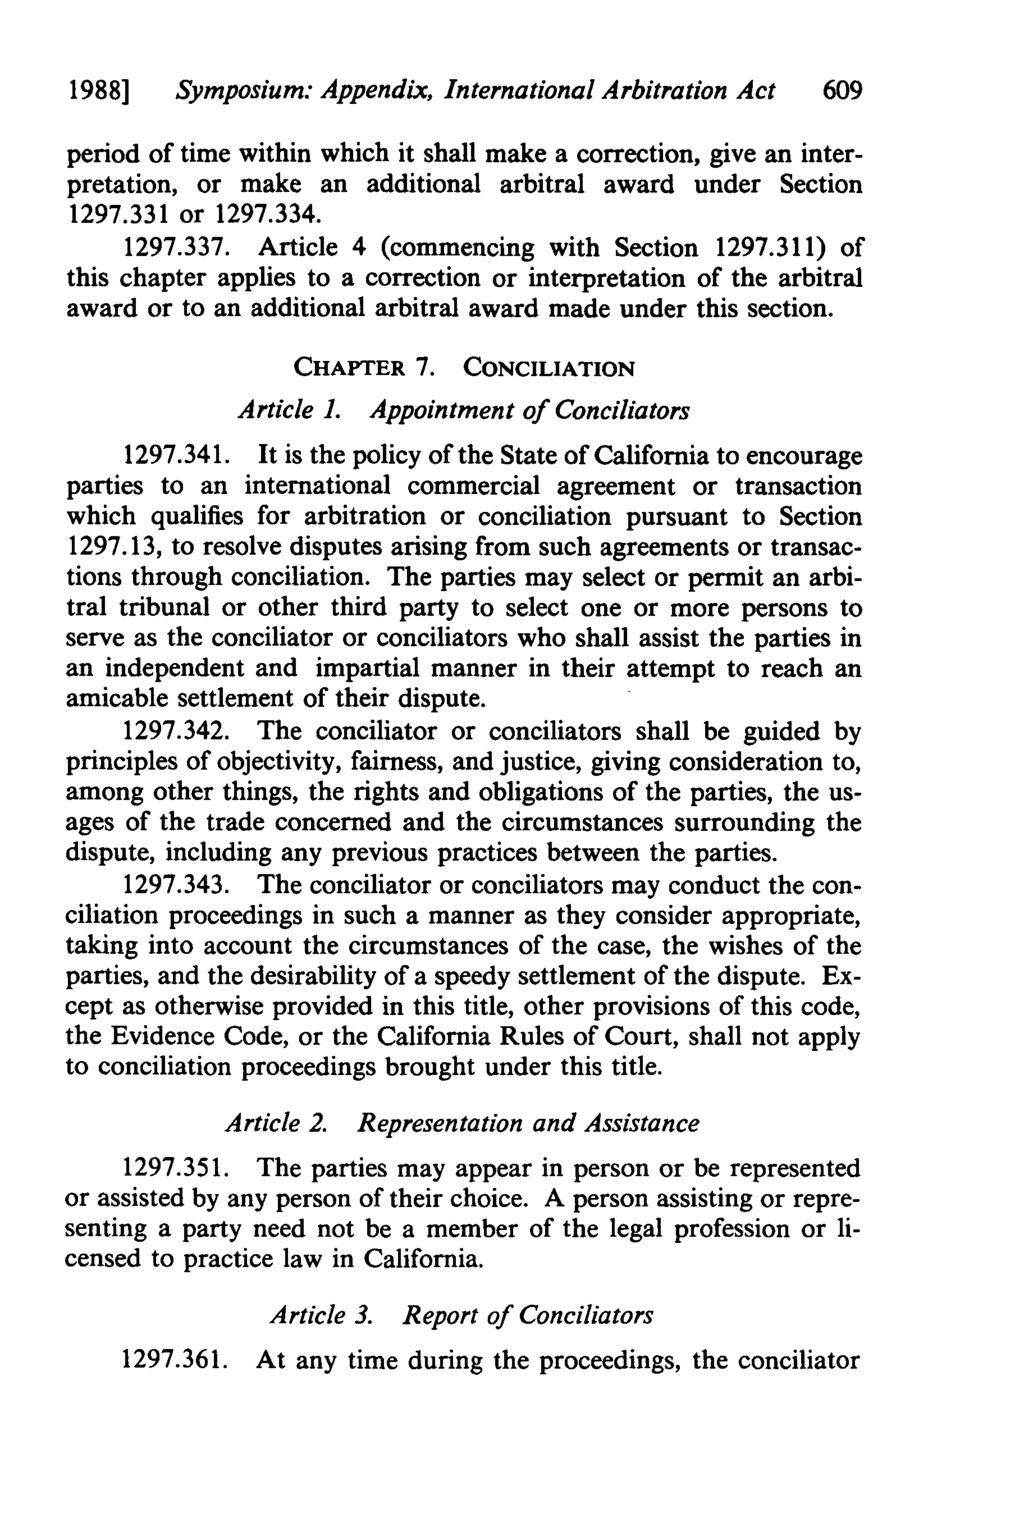 1988] Symposium: Appendix, International Arbitration Act 609 period of time within which it shall make a correction, give an interpretation, or make an additional arbitral award under Section 1297.